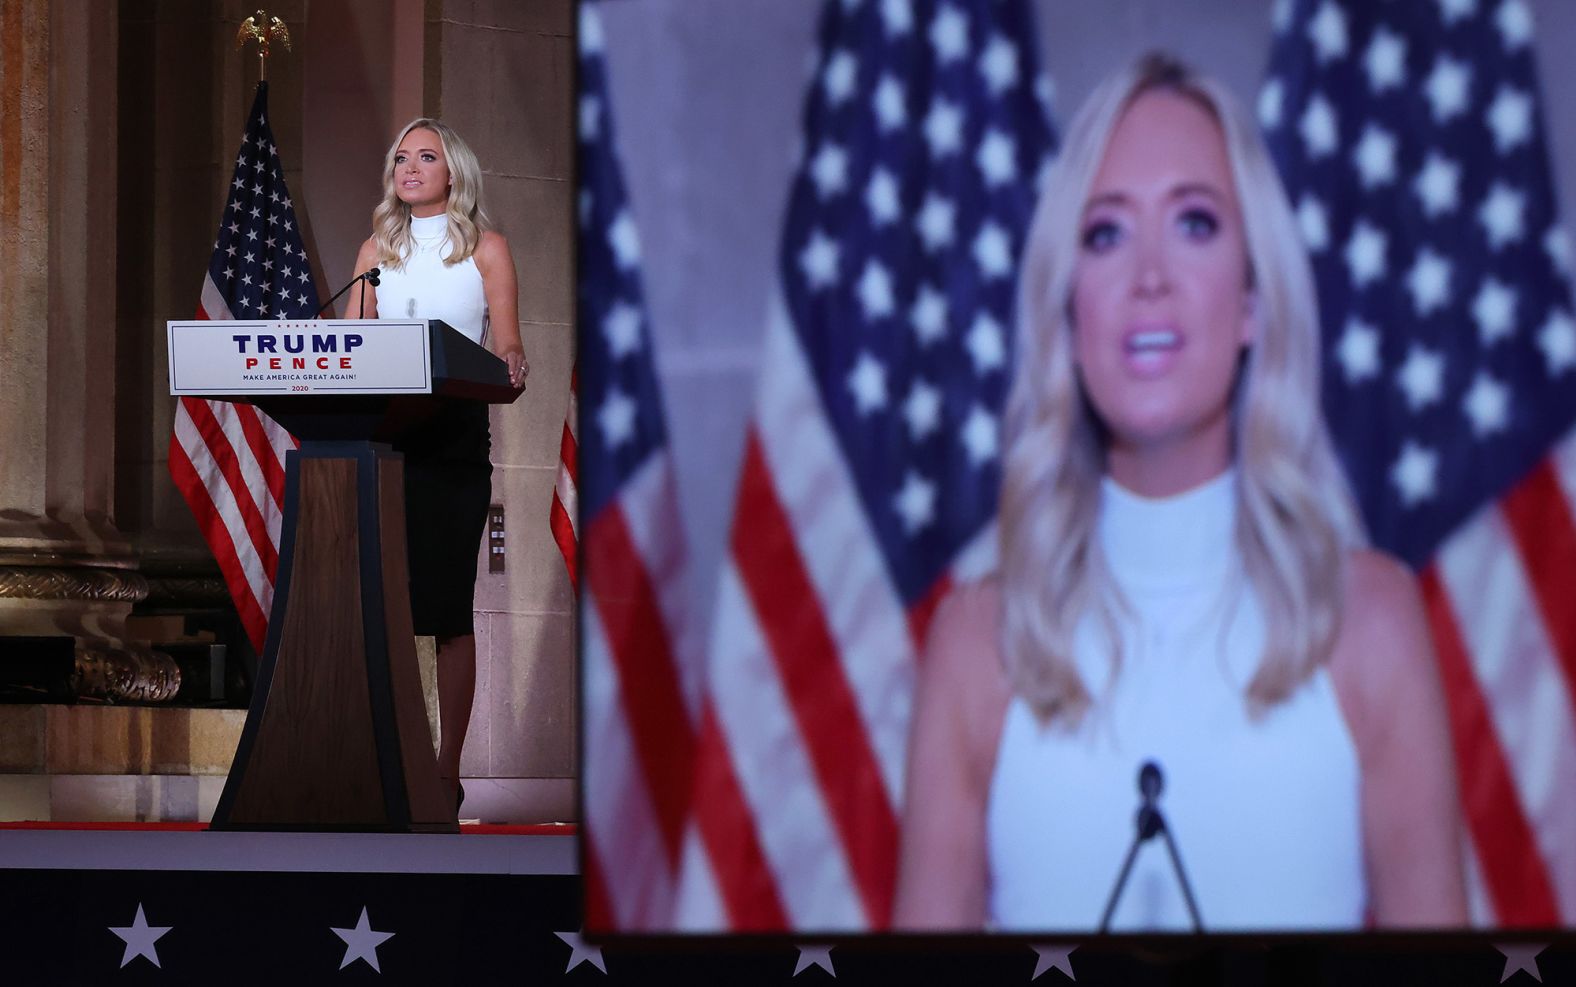 White House press secretary Kayleigh McEnany <a href="https://www.cnn.com/politics/live-news/rnc-2020-day-3/h_97161cc43e159d40da69a16dccd0b3d9" target="_blank">shared her personal story of undergoing a preventative mastectomy</a> as a testament to how Trump cares about preexisting conditions.